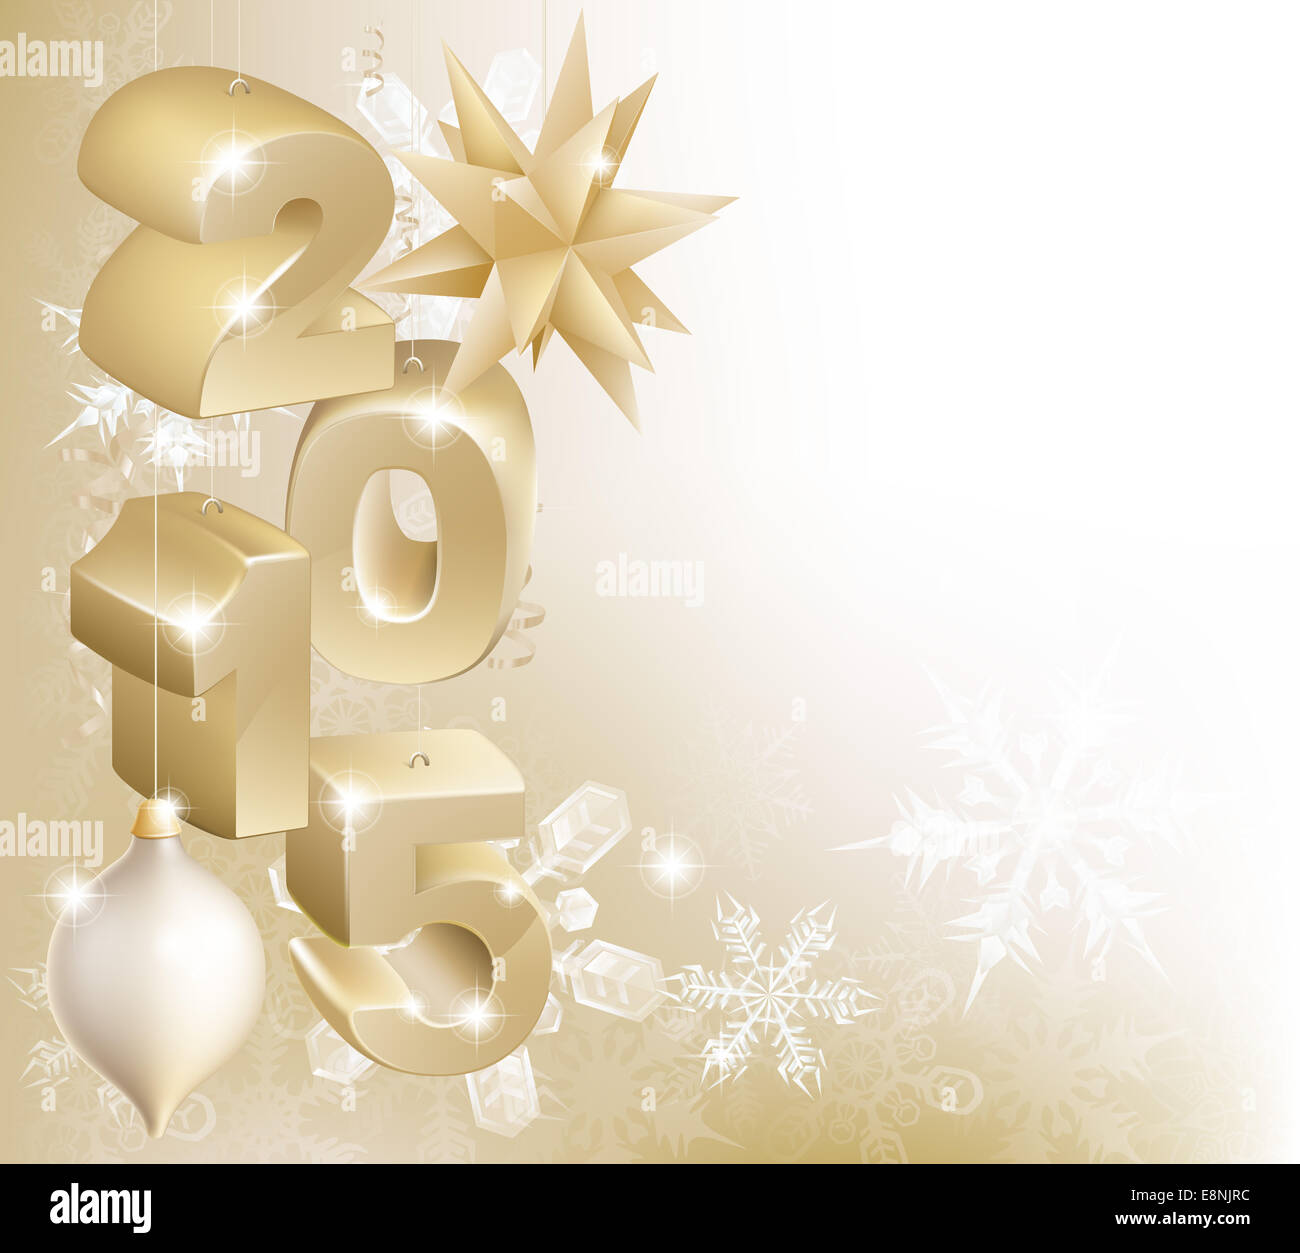 Gold 2015 Christmas or New Year decorations background with snowflakes and baubles reading 2015 Stock Photo